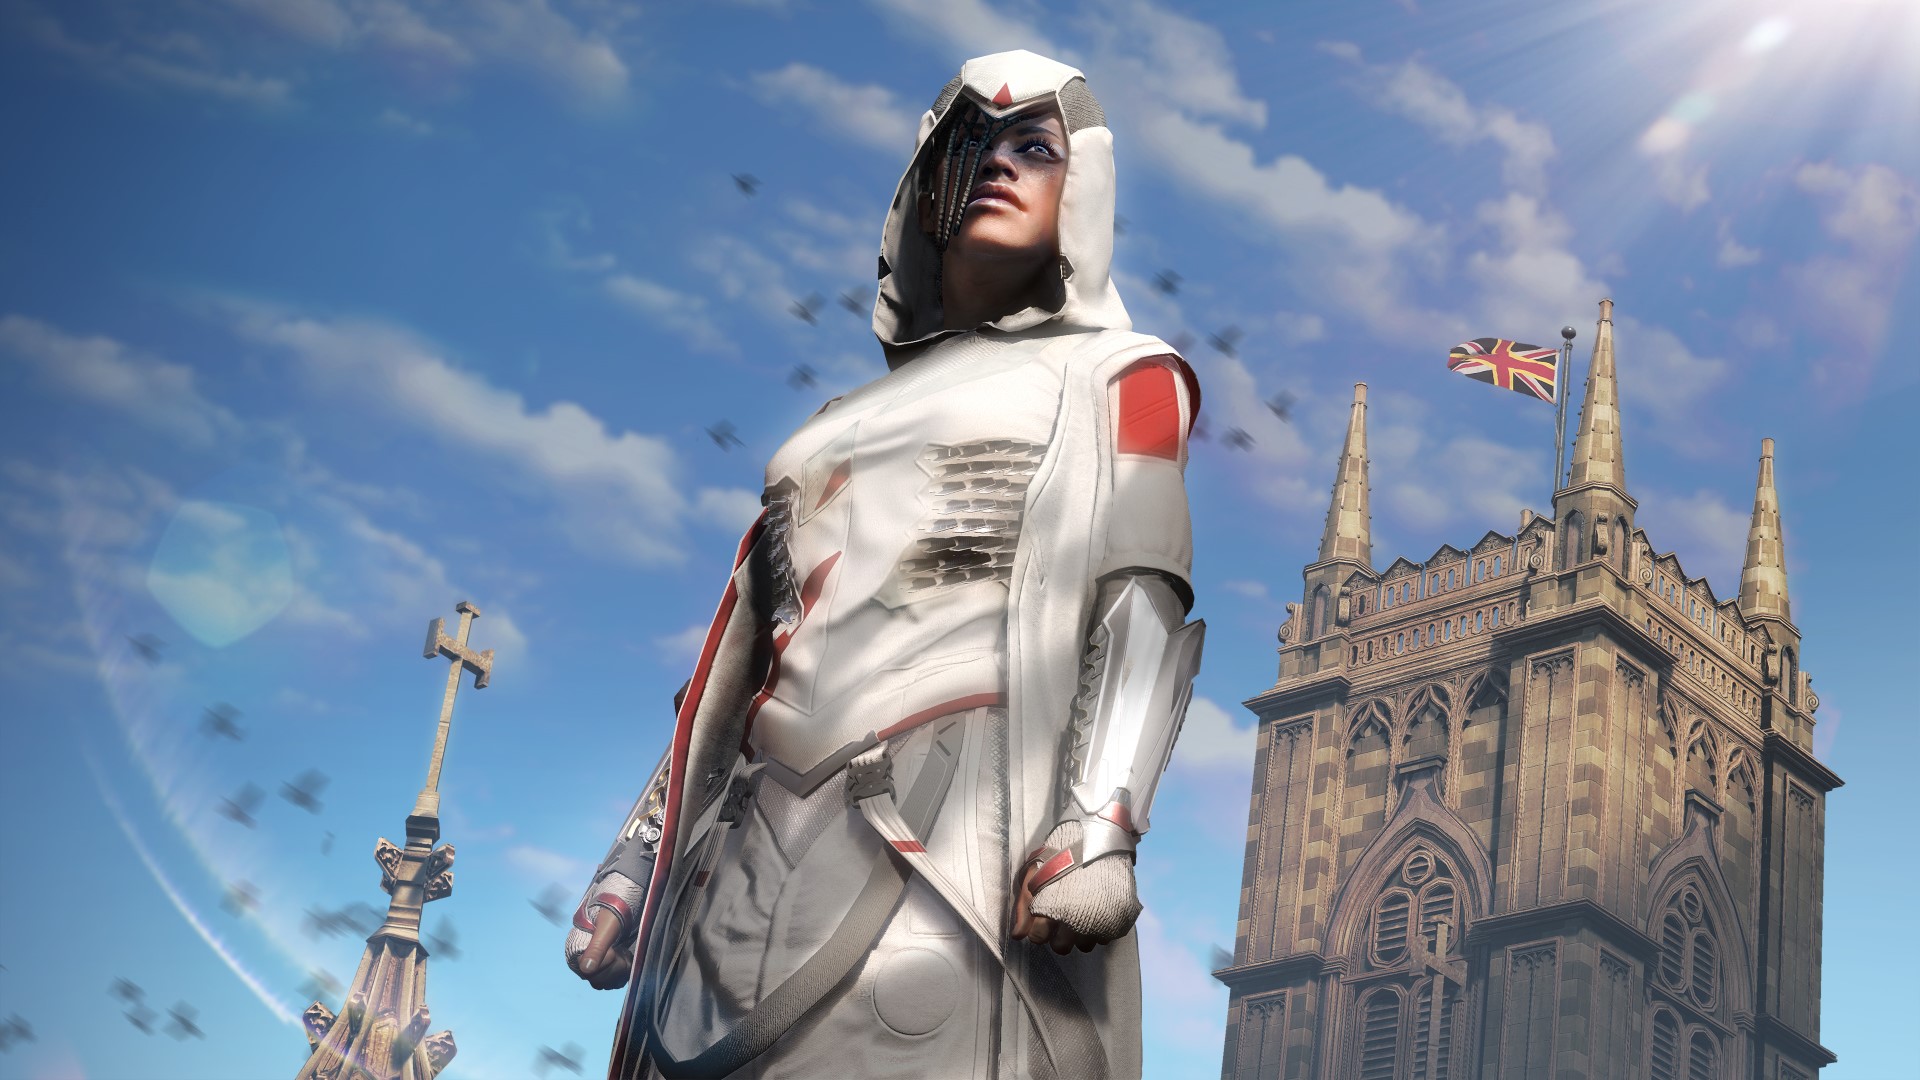 Watch Dogs: Legion Review: Reflective But Unthoughtful Resistance